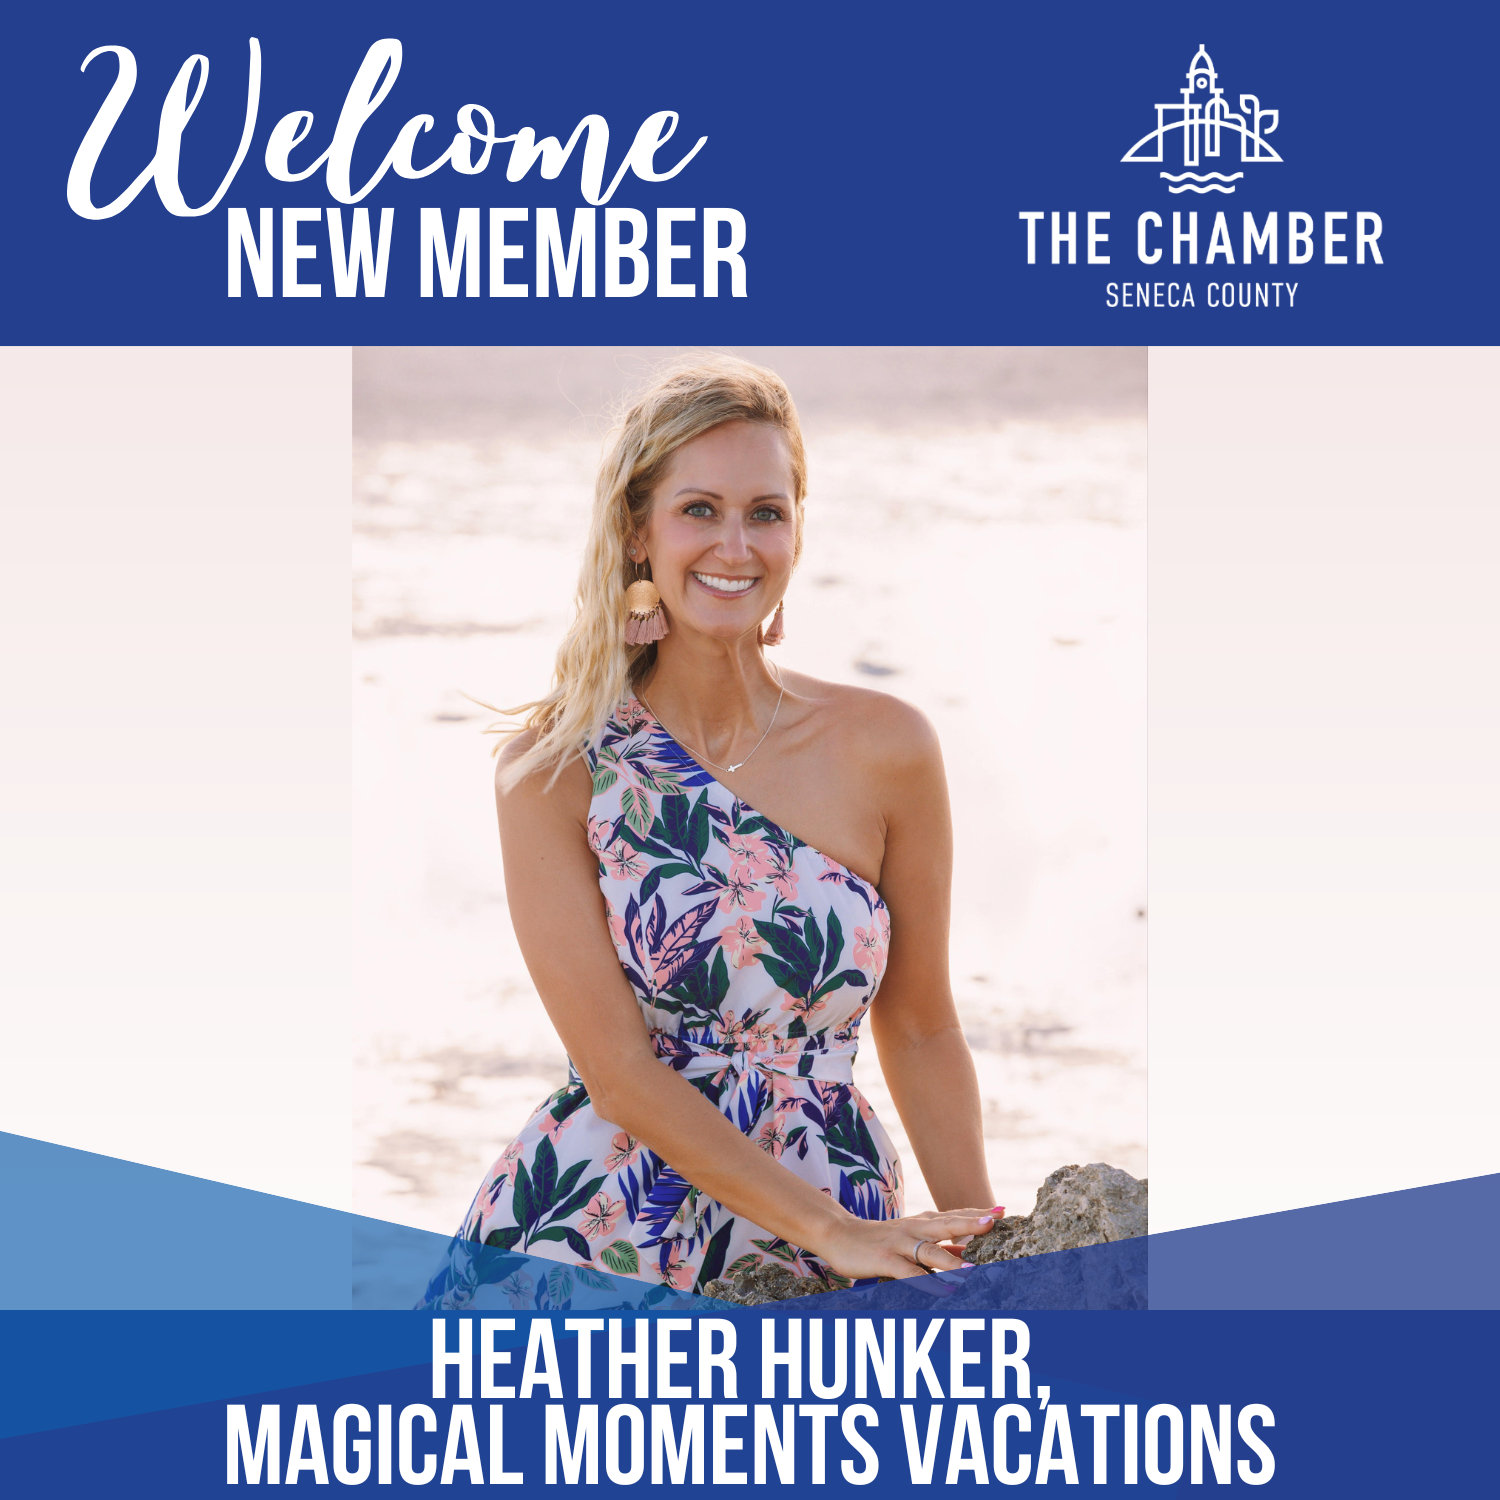 New Member: Heather Hunker with Magical Moments Vacations